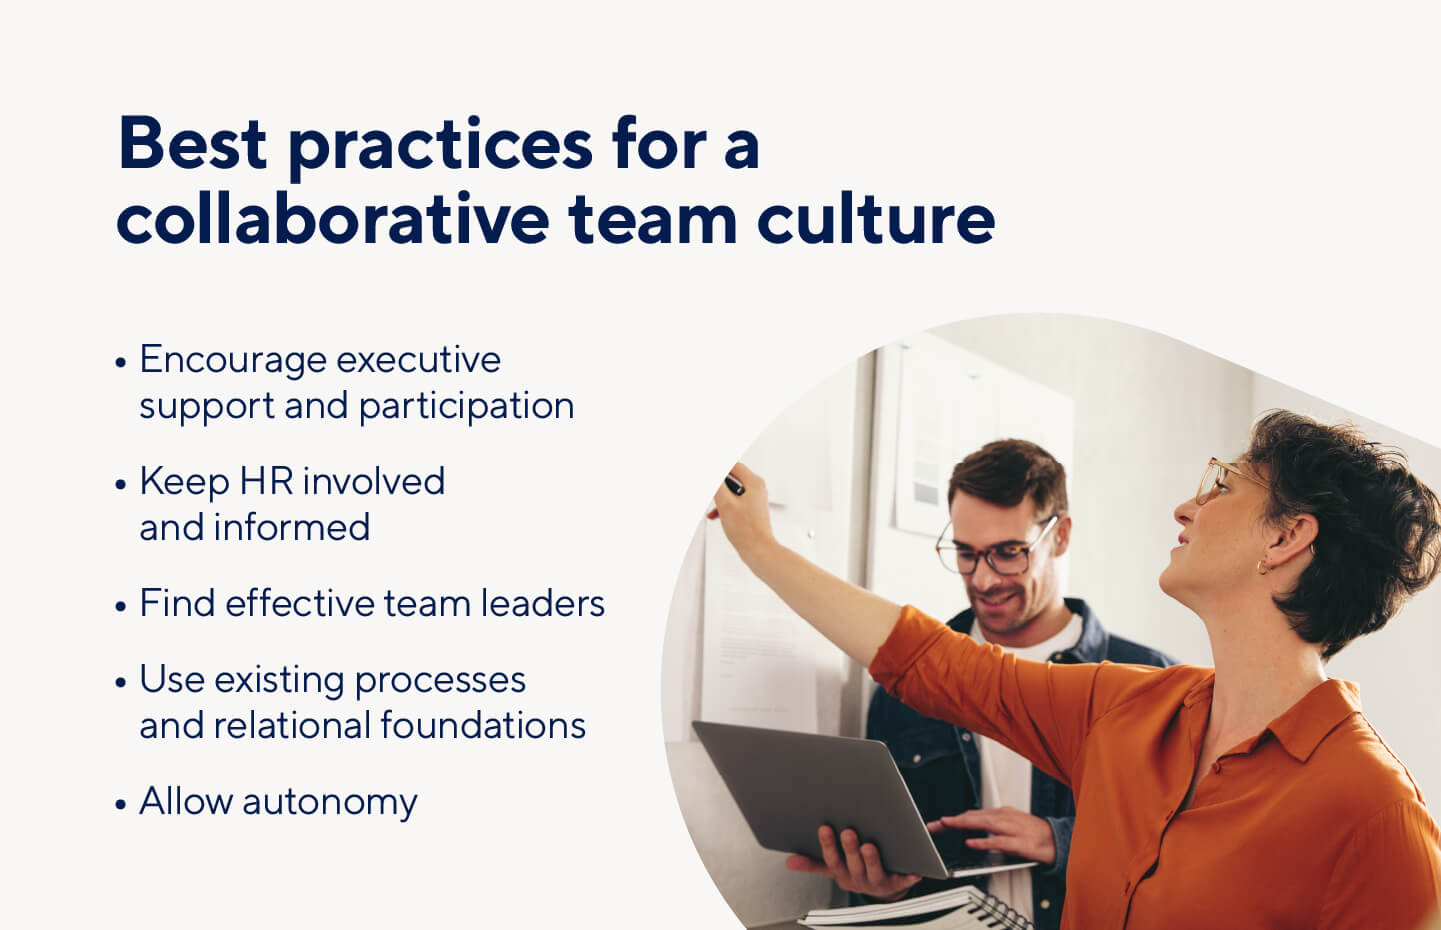 Best practices for a collaborative team culture include executive participation and autonomy.